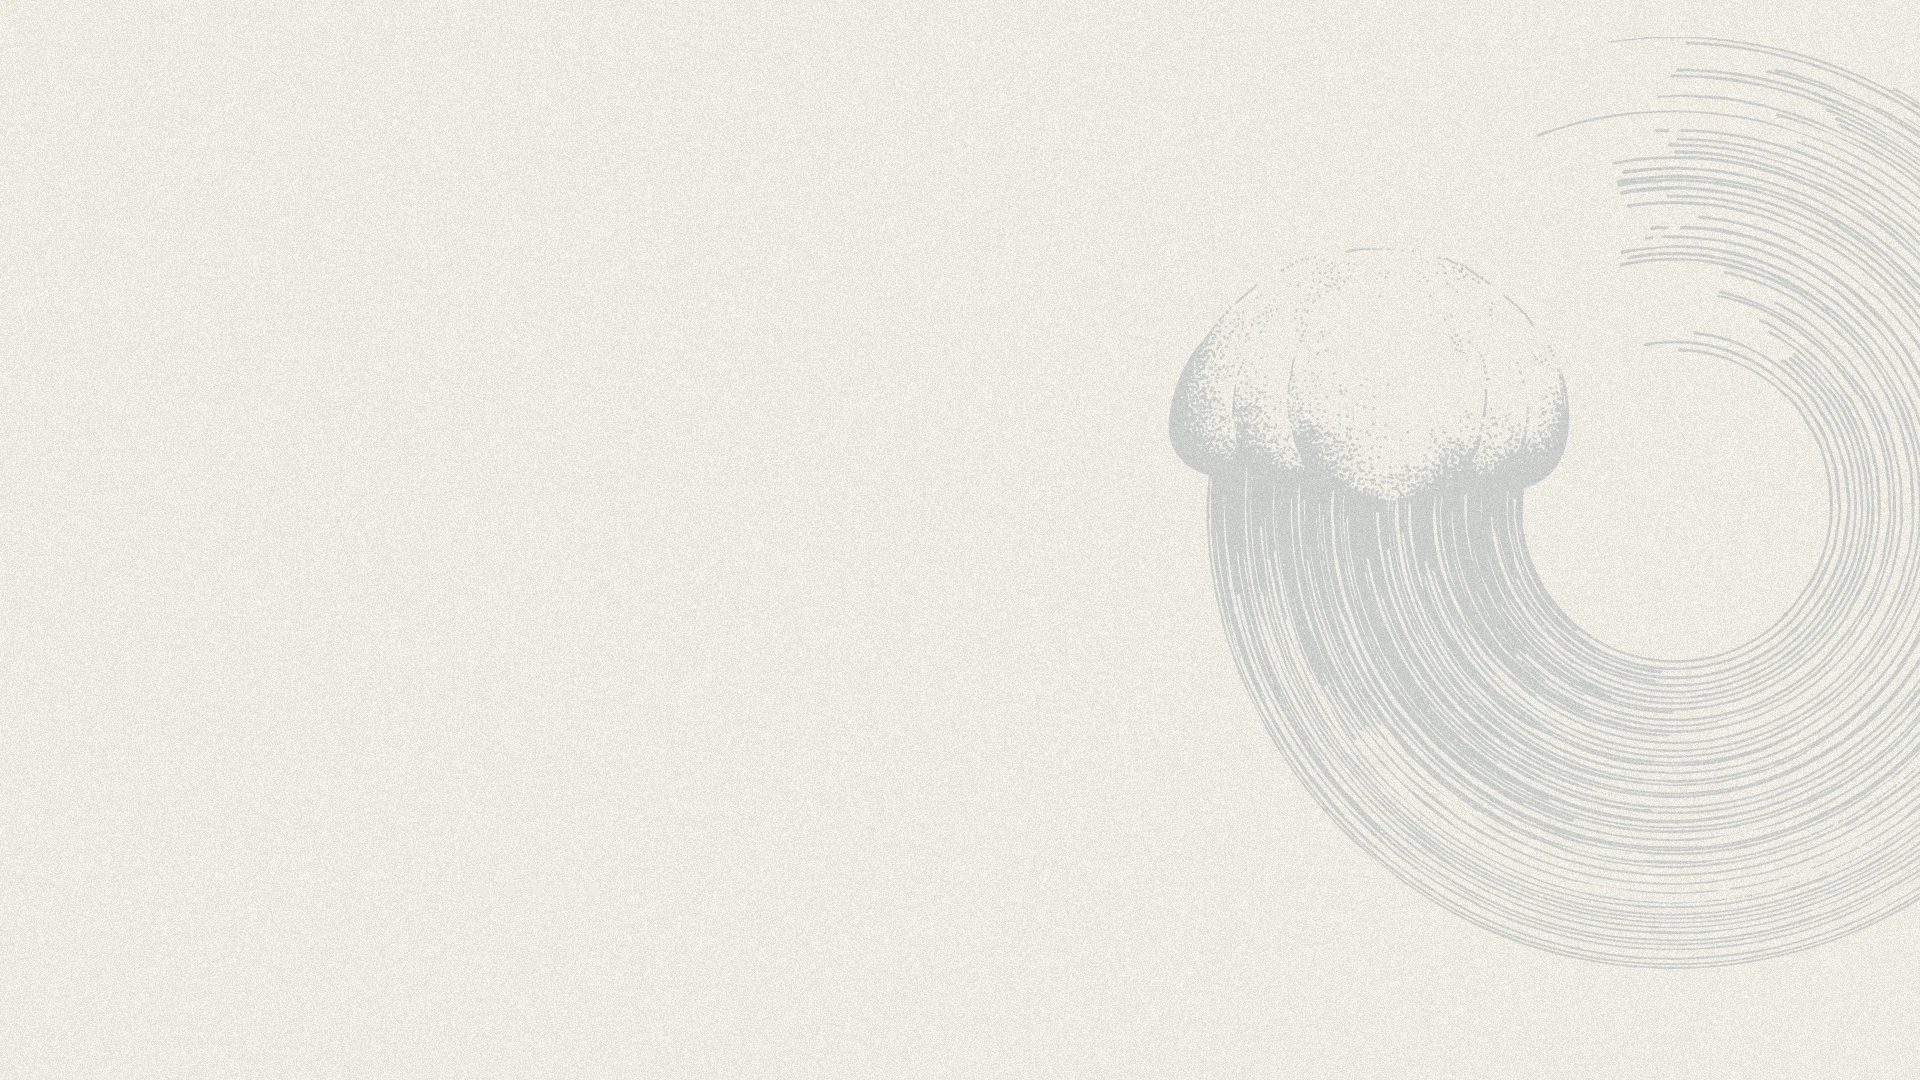 r922-homepage-landing-page-jellyfish02-17104033763646.png